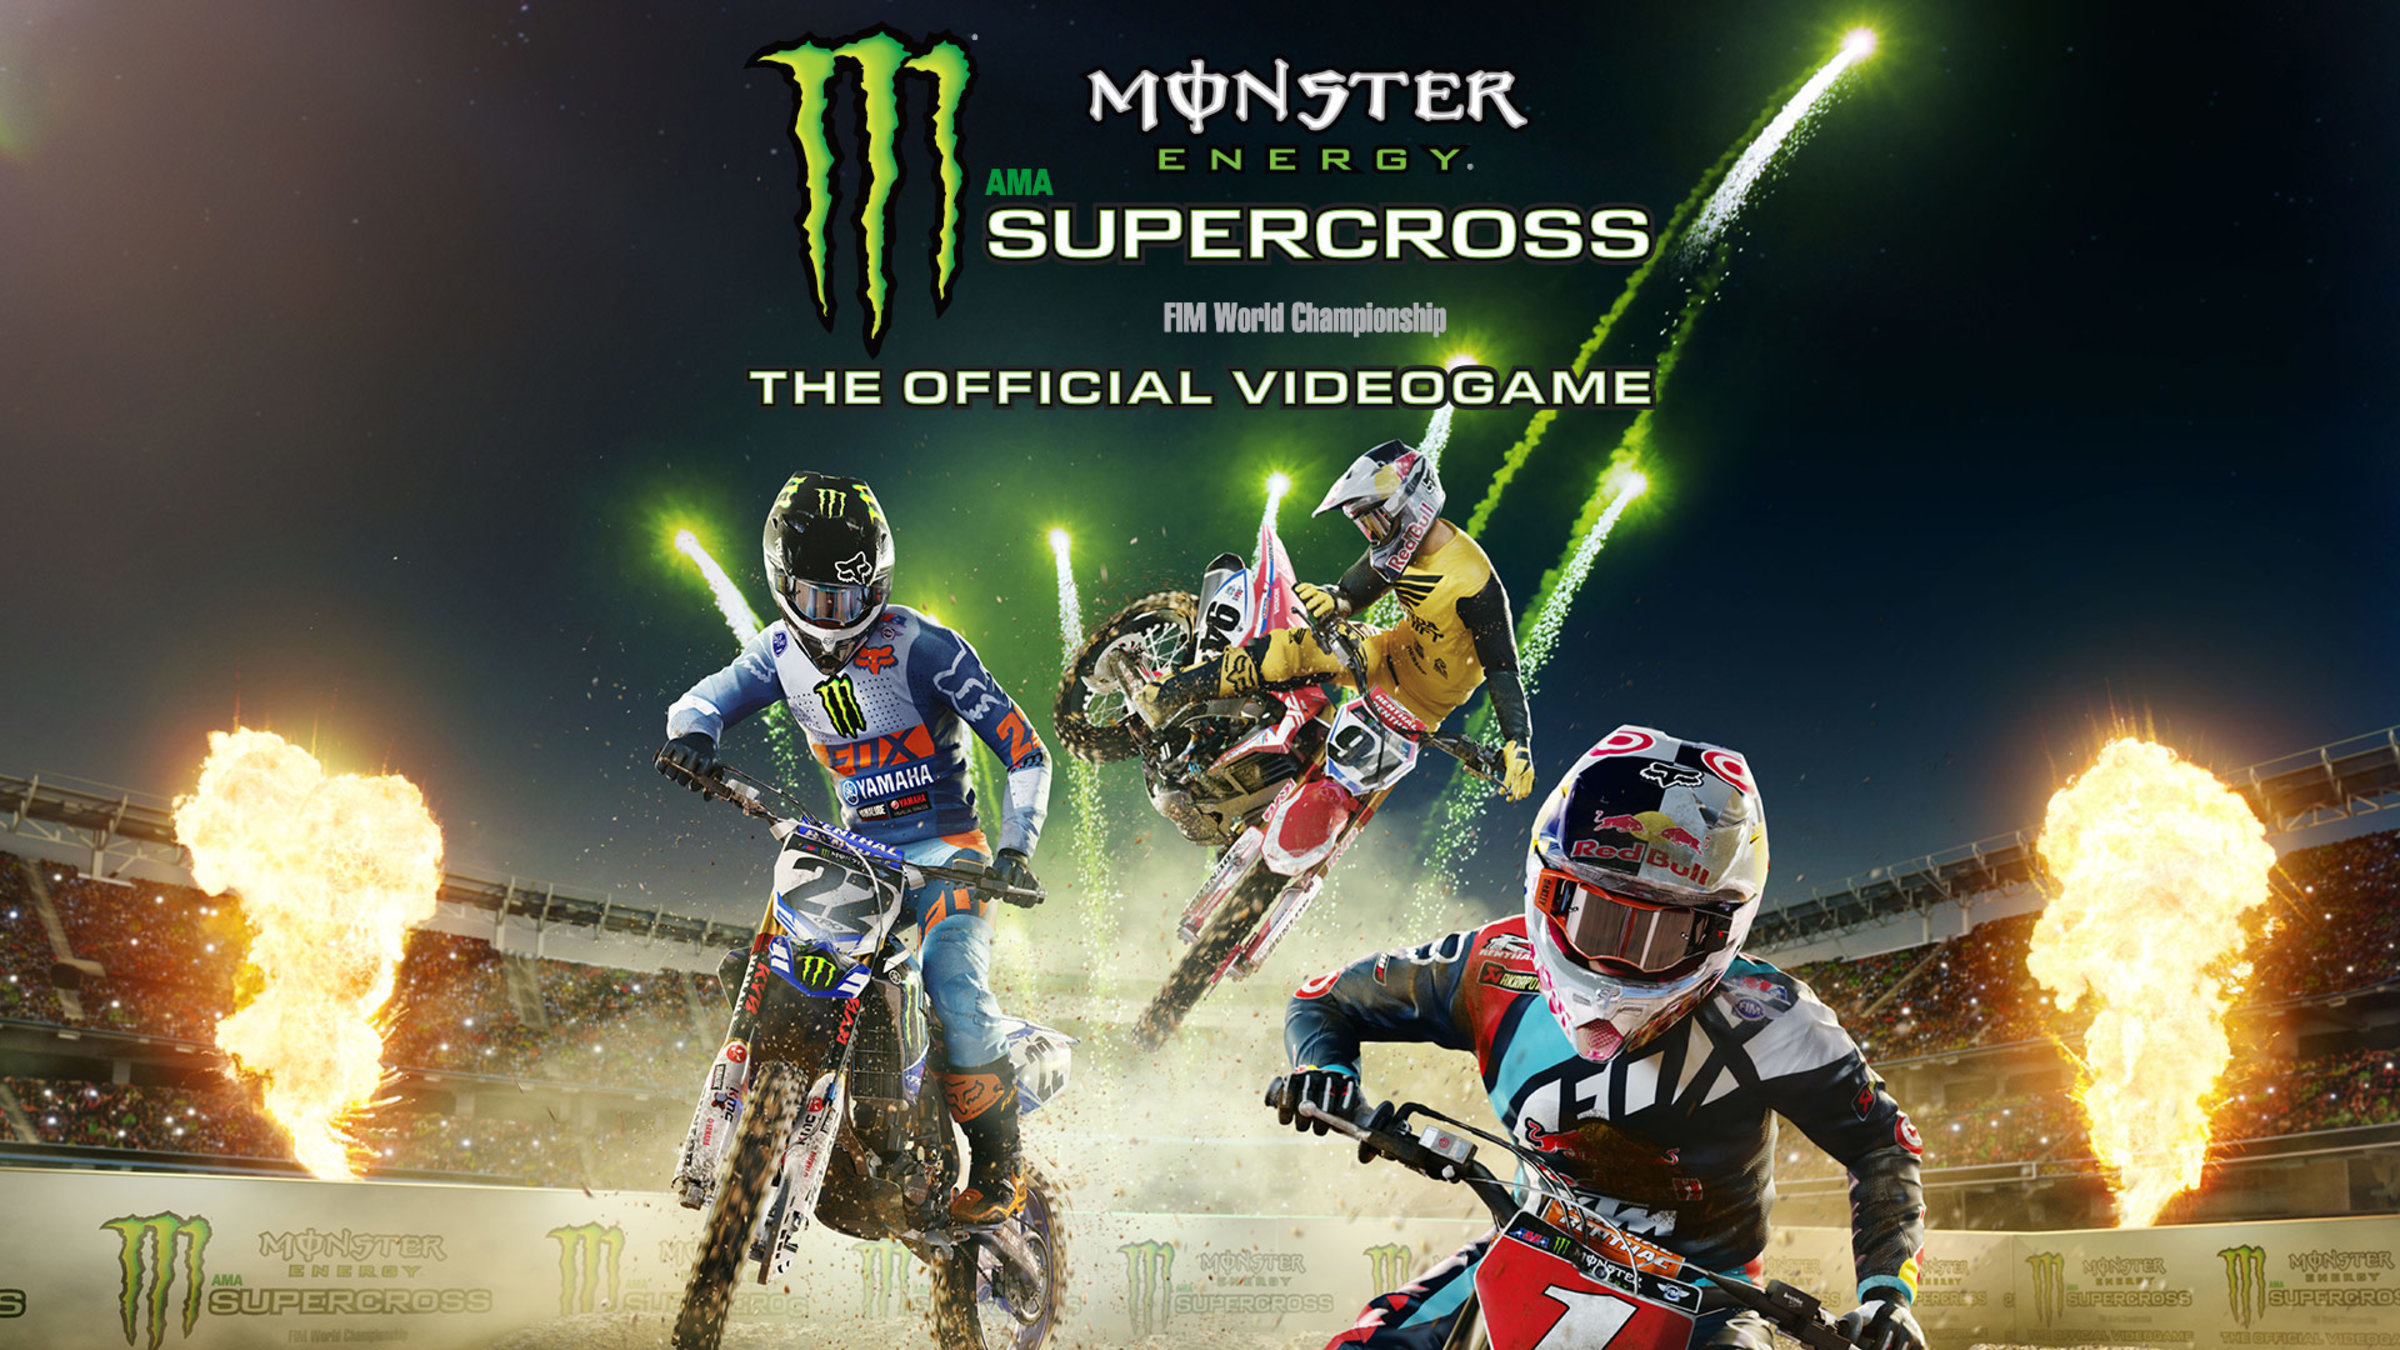 Monster Energy Supercross - The Official Videogame for Nintendo Switch